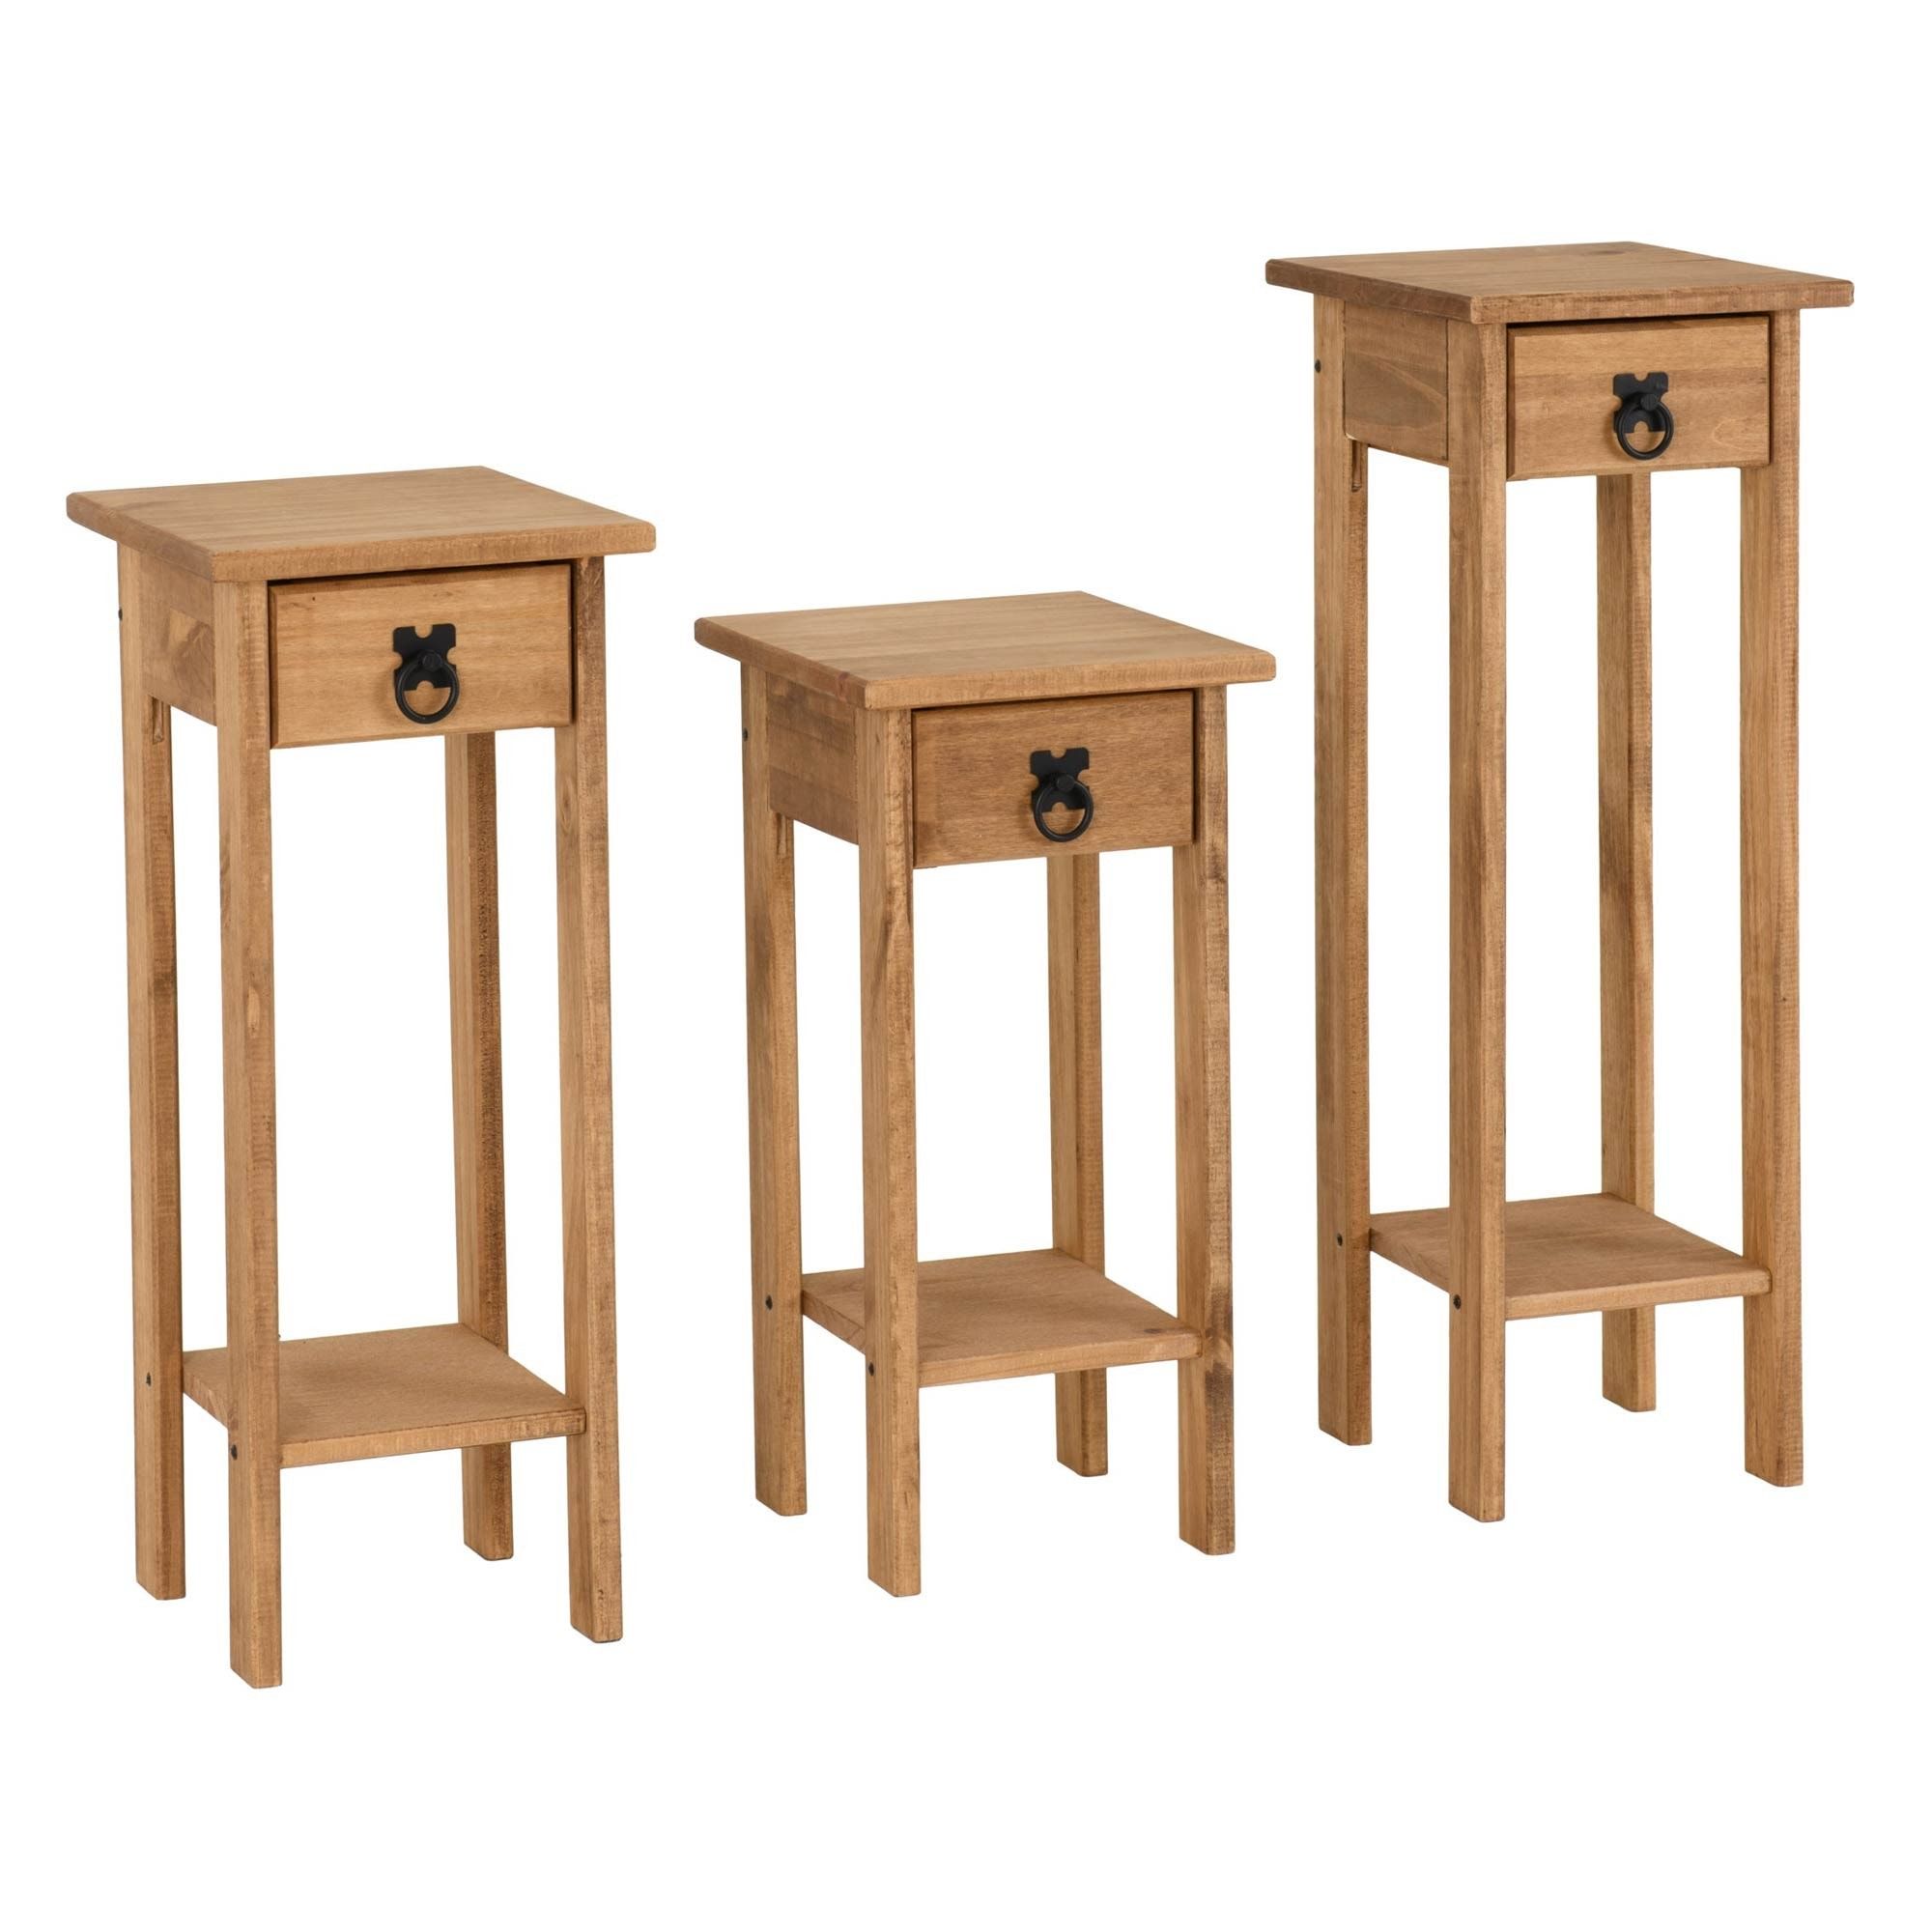 Huxley Pine Plant Stands | Plant Stand Set | 3 Piece Plant Stand Pertaining To Set Of 3 Plant Stands (View 7 of 15)